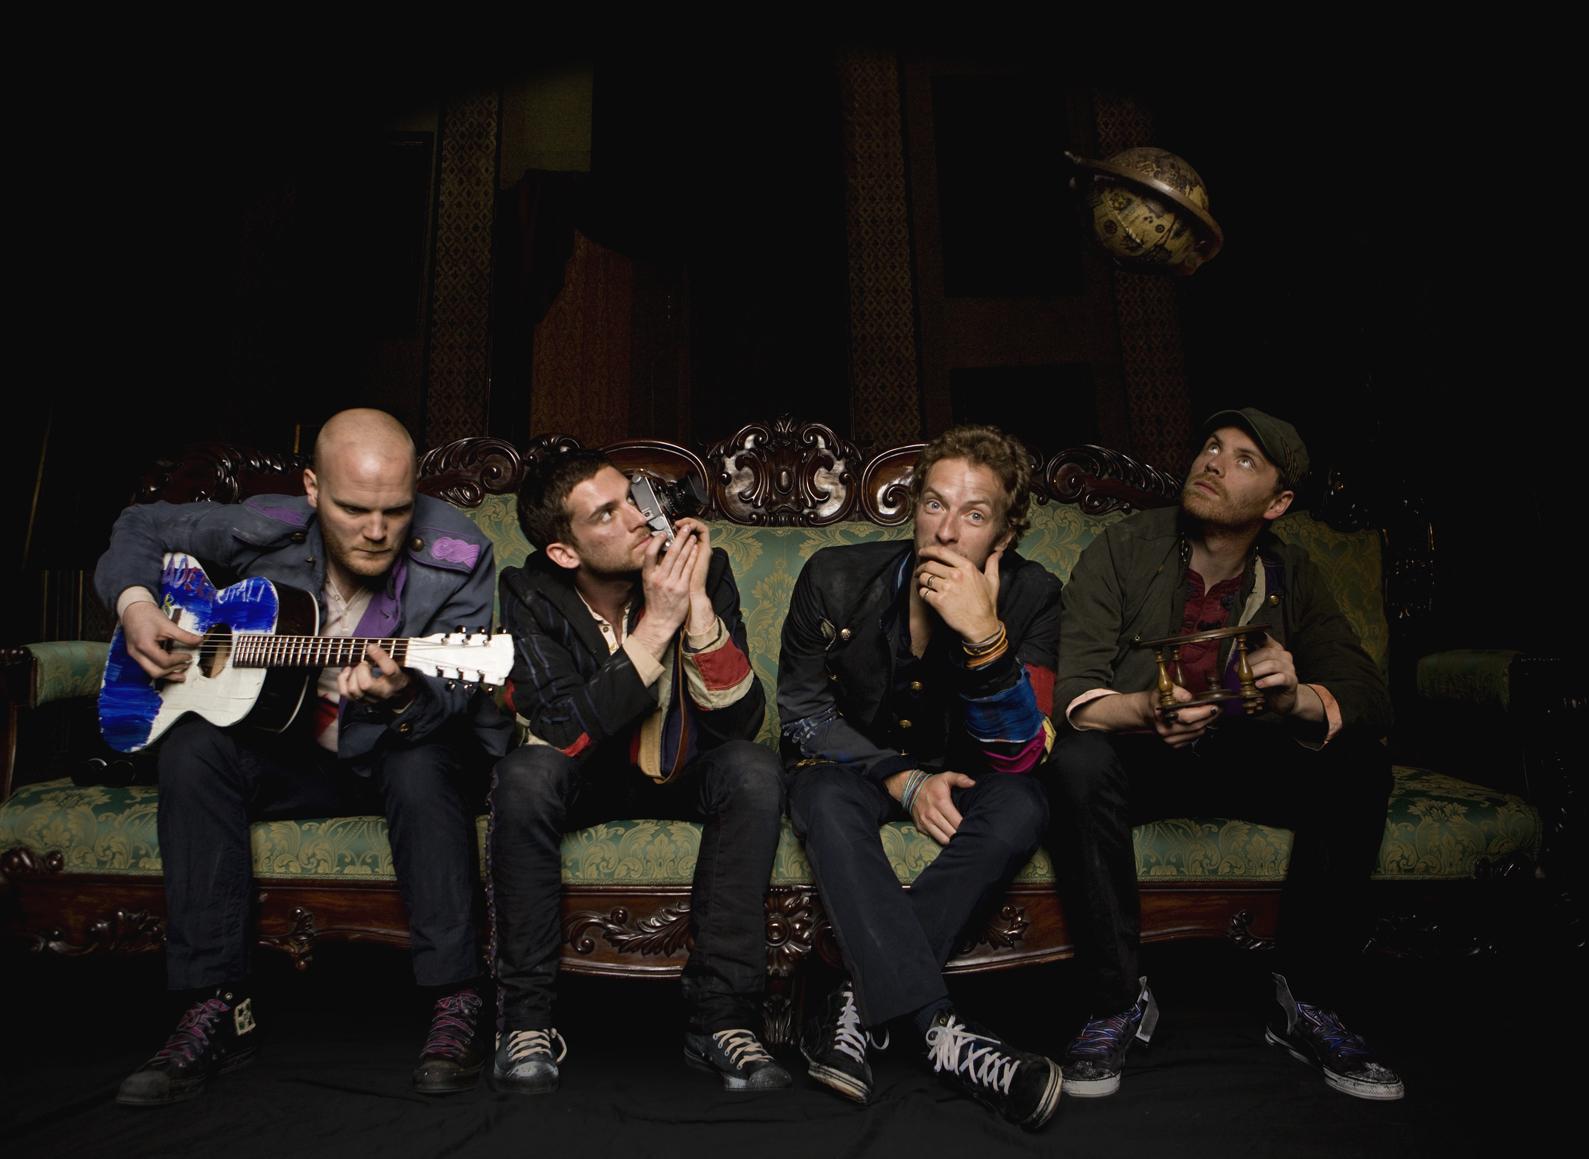 Will Champion, Guy Berryman, Chris Martin, and Jonny Buckland sit on a couch in the costumes associated with their "Viva la Vida" album.  Only Chris Martin looks at the camera.